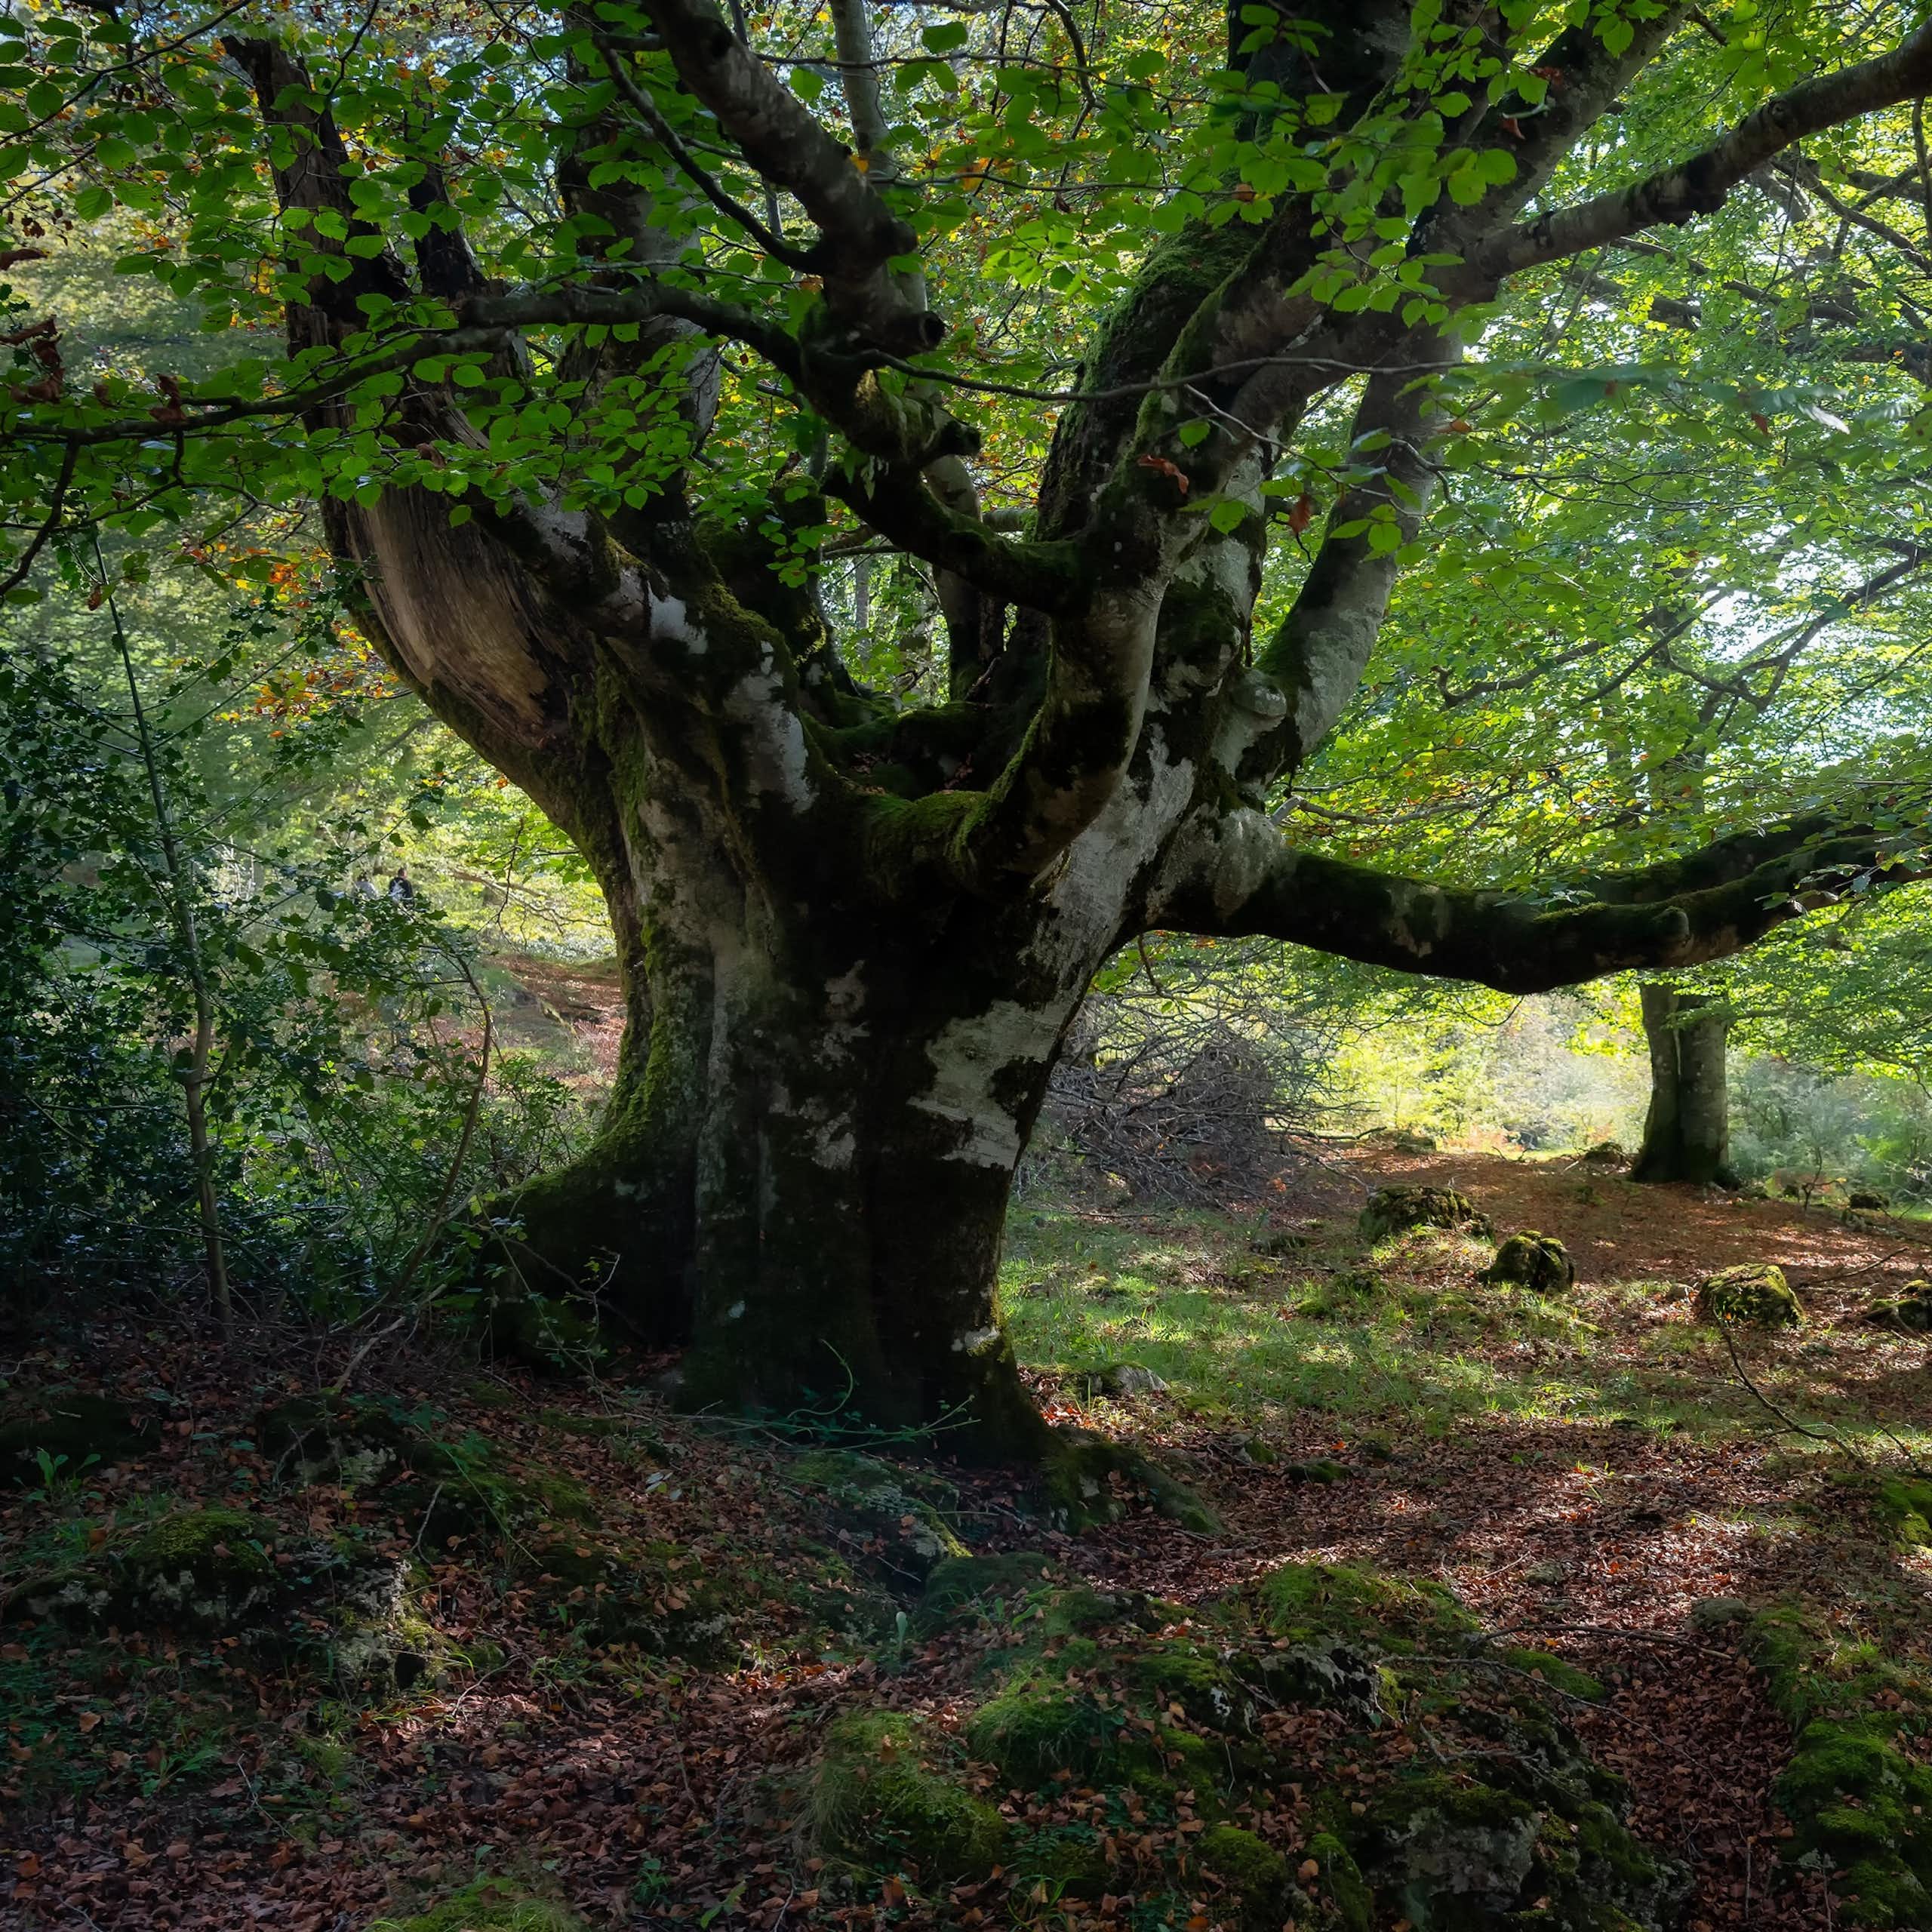 Huge beech tree with large branches in the enchanted forest in the Basque Country, Alava, Spain.